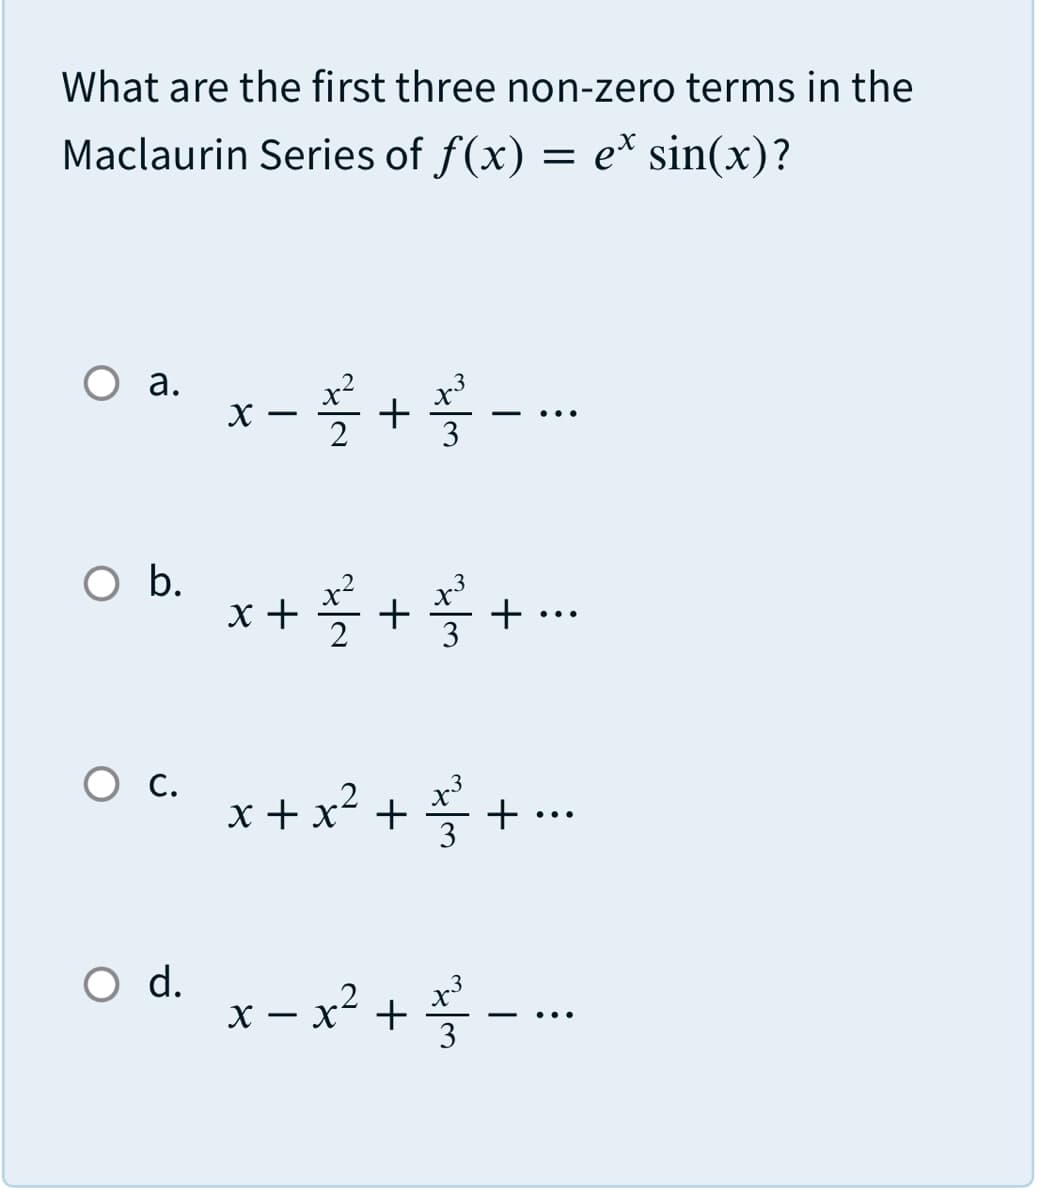 What are the first three non-zero terms in the
Maclaurin Series of f(x) = e* sin(x)?
а.
.2
.3
+--
x
-
3
O .
x+ 플 + 물 +.
3
О.
x3
x + x² + + ..
o d. x- x² +-.-.
X – x² +
3
